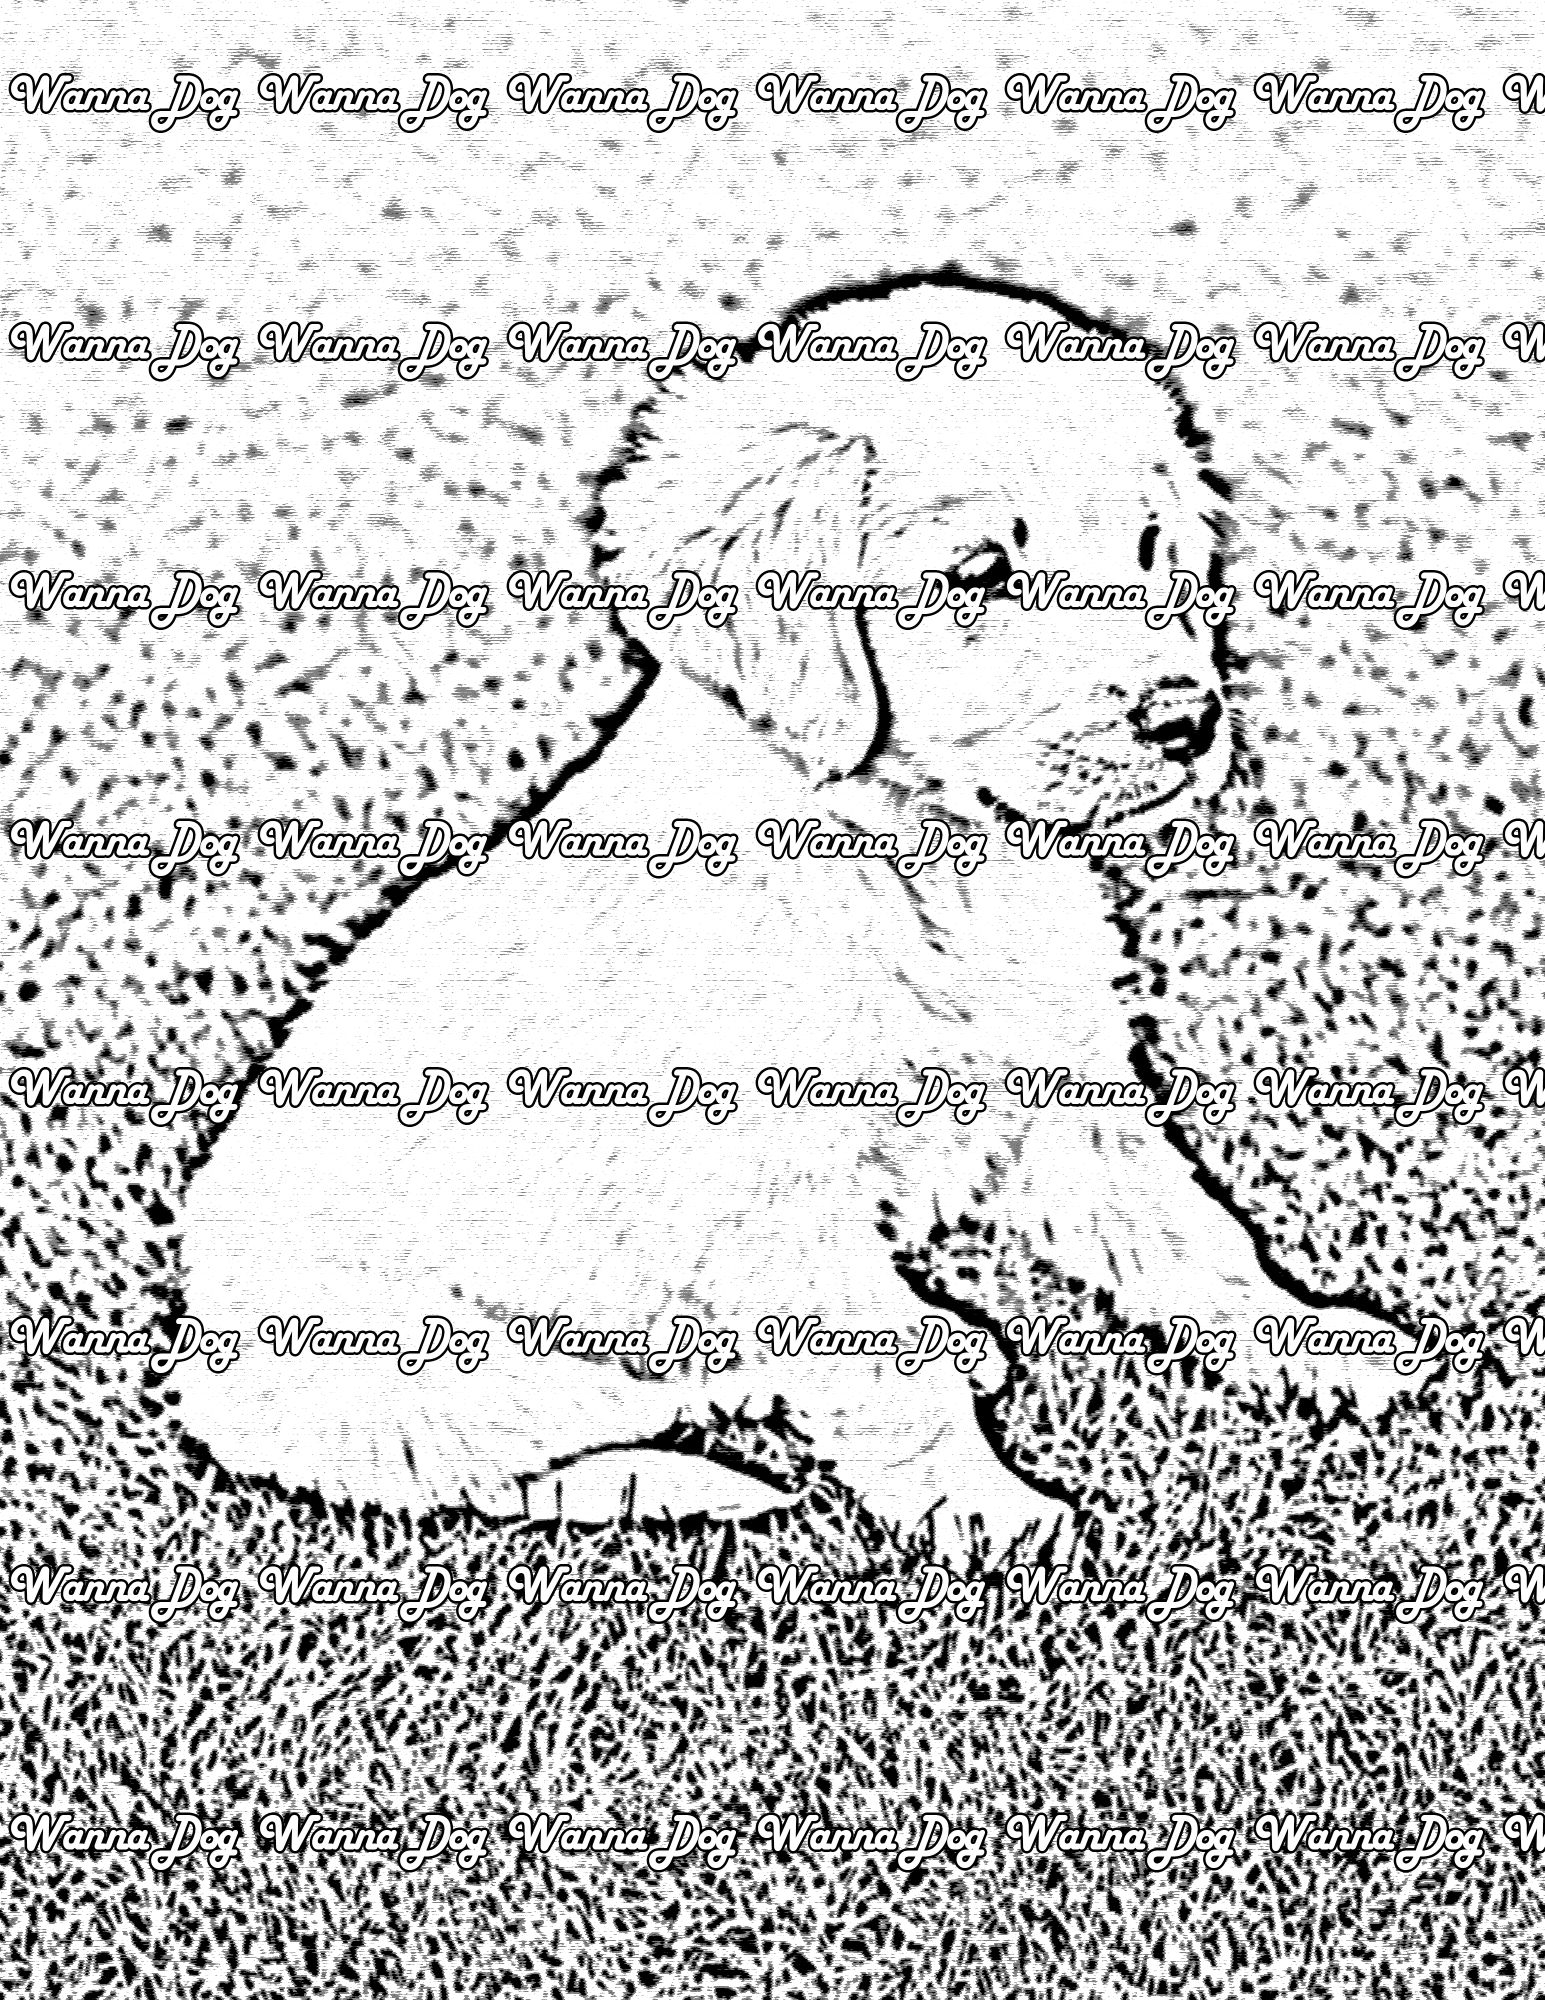 Golden Retriever Puppy Coloring Page of a Golden Retriever Puppy sitting in grass